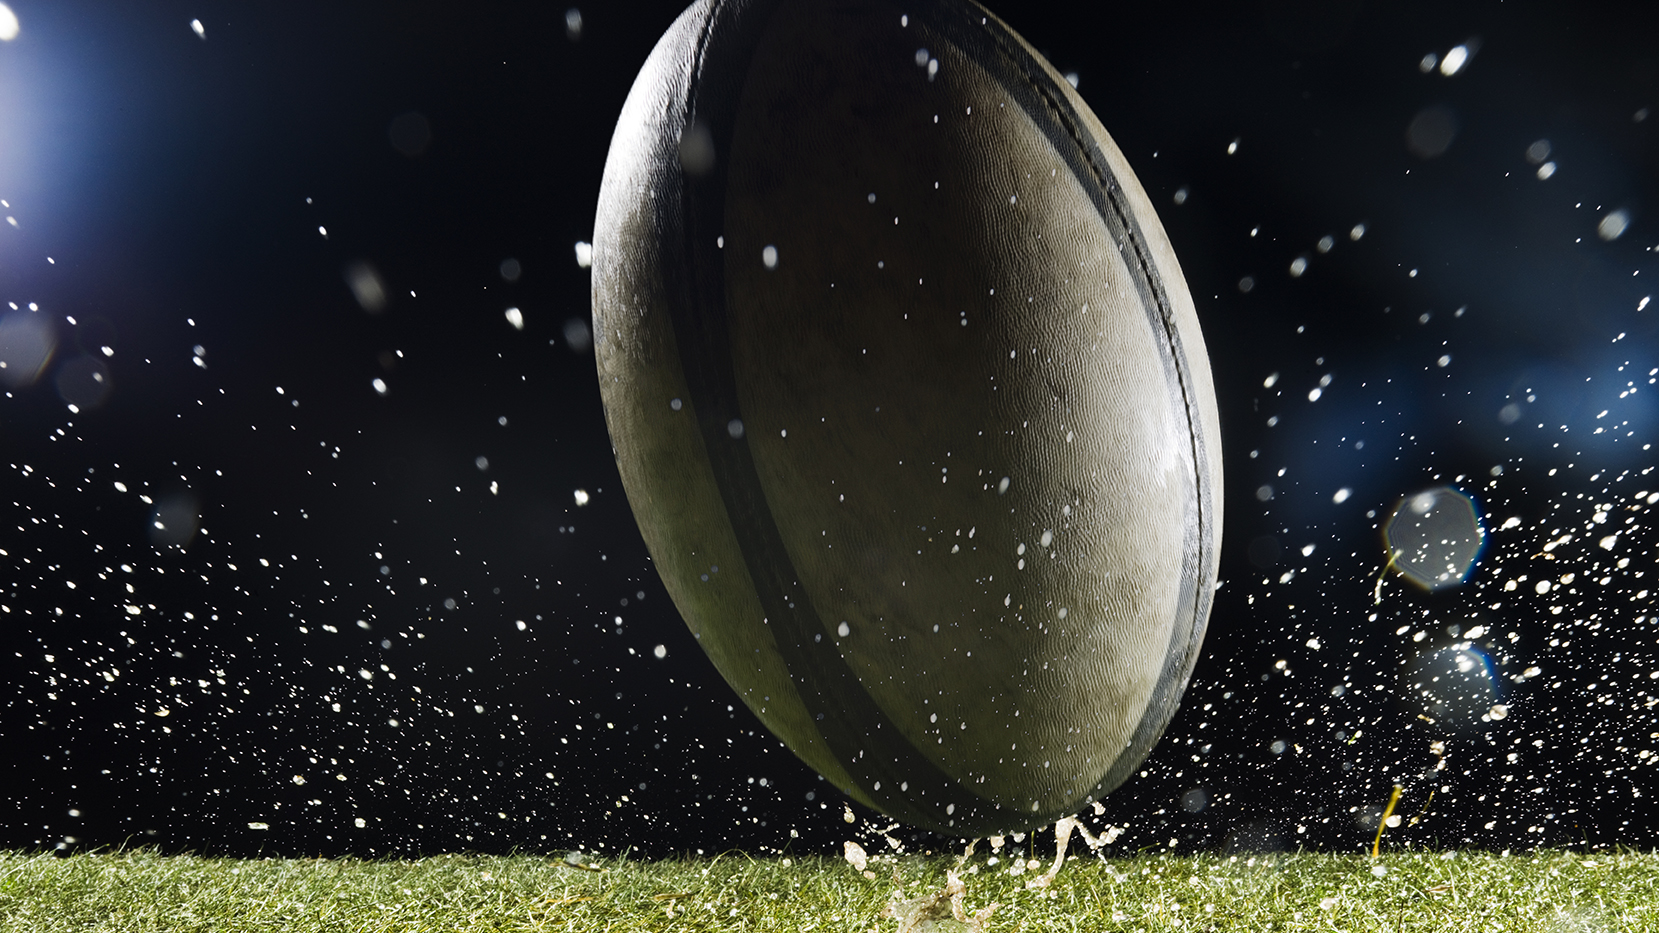 A close up photo of a rugby ball with water droplets